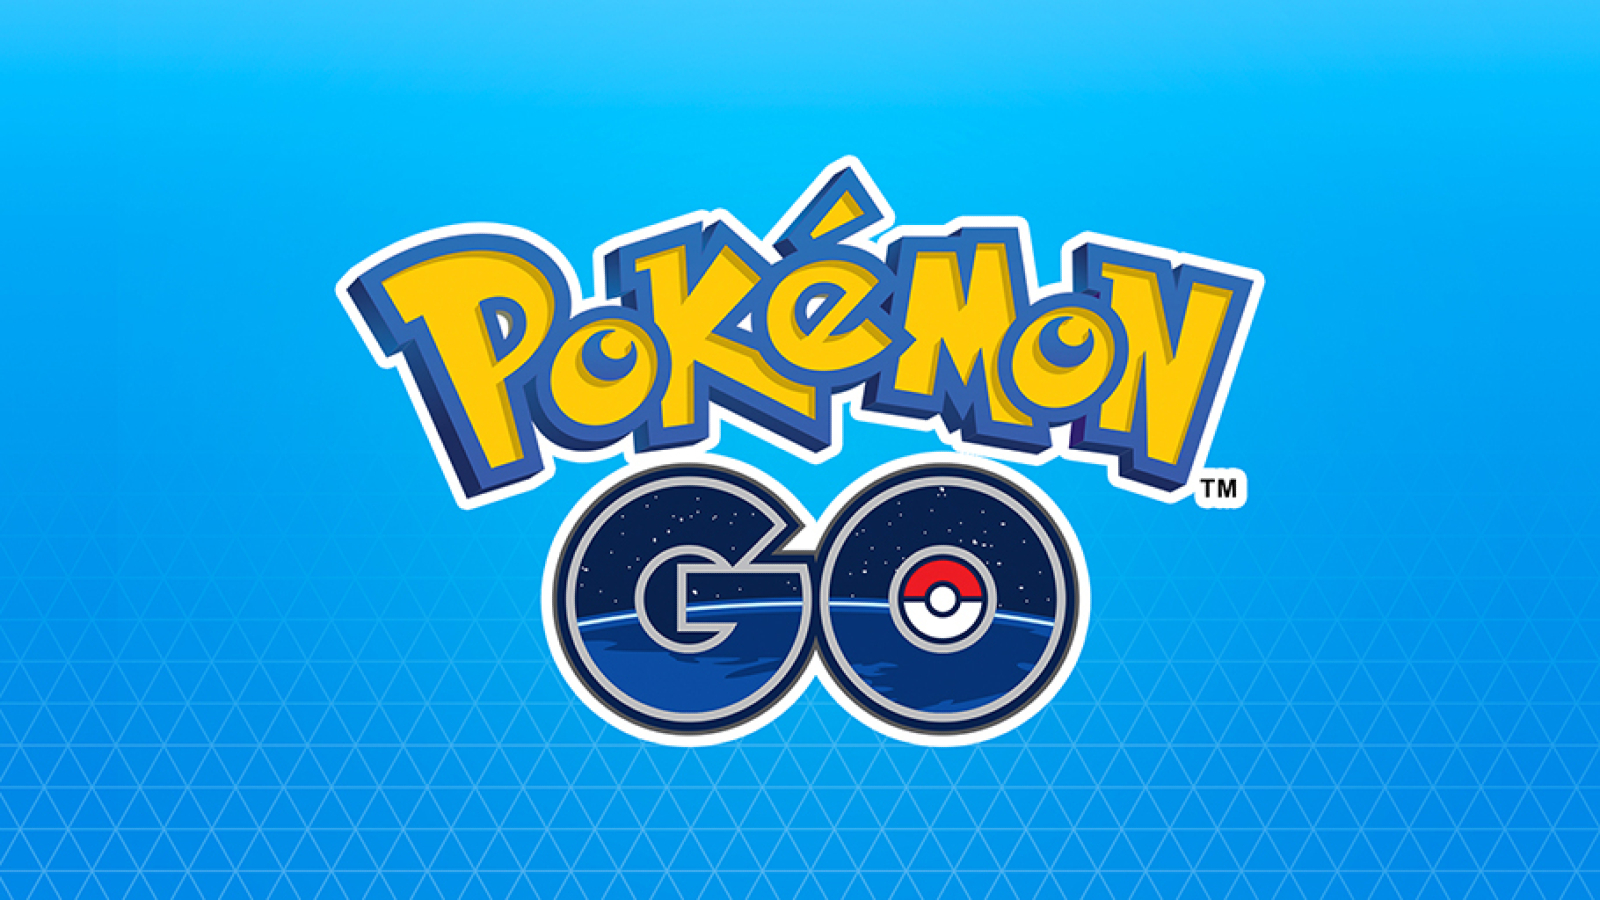 Pokemon Go players claim price hikes are driving them away from the game – Dexerto